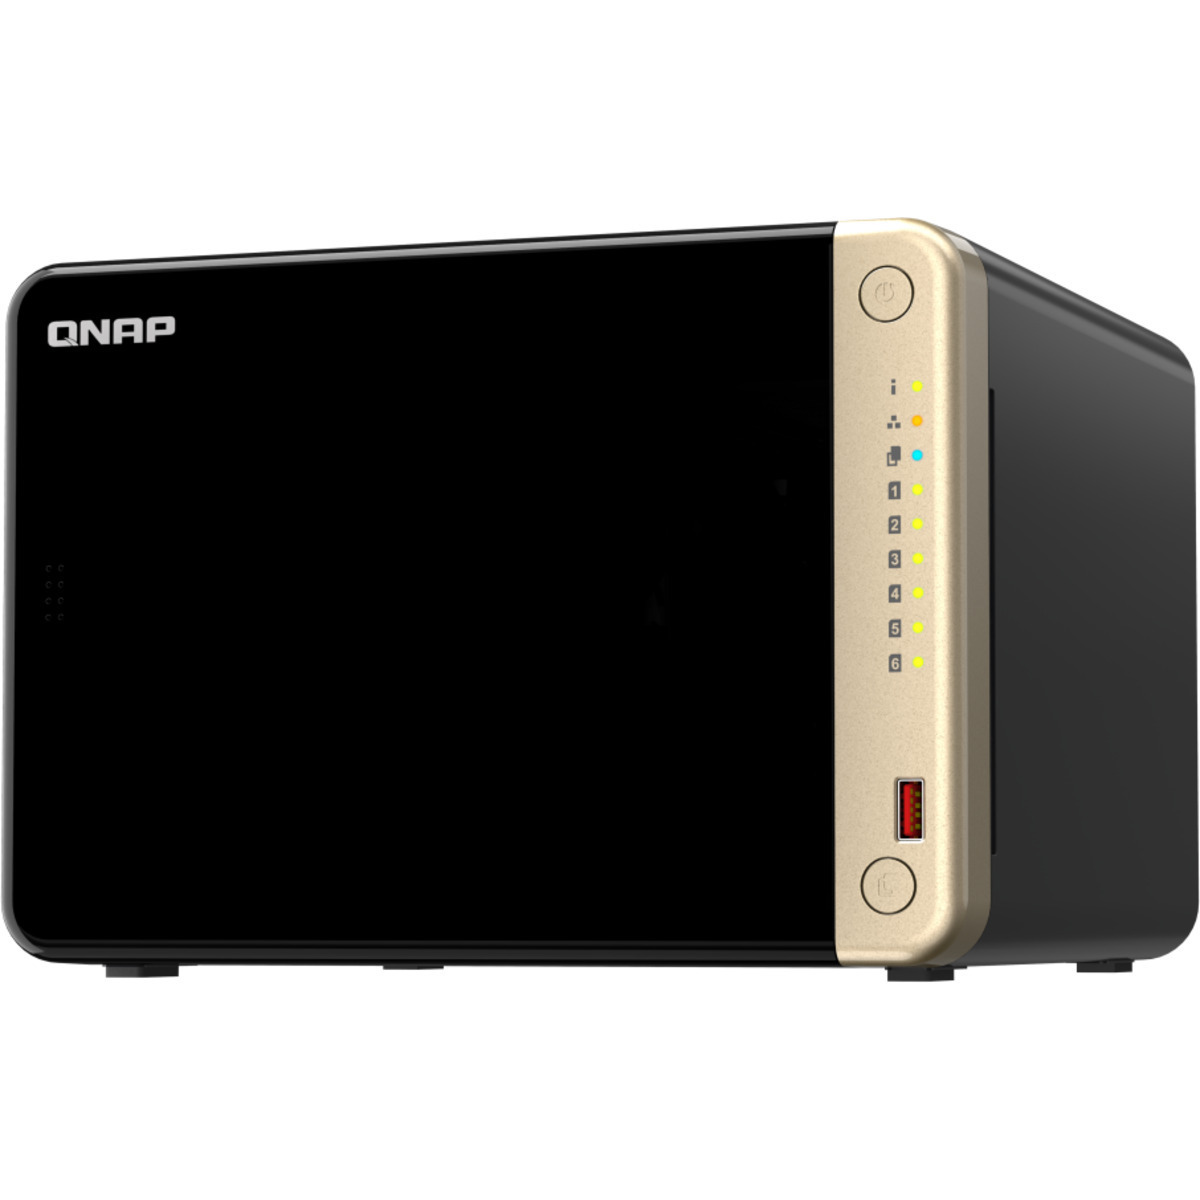 buy $1671 QNAP TS-664 12tb Desktop NAS - Network Attached Storage Device 6x2000gb Seagate IronWolf Pro ST2000NT001 3.5 7200rpm SATA 6Gb/s HDD NAS Class Drives Installed - Burn-In Tested - FREE RAM UPGRADE - nas headquarters buy network attached storage server device das new raid-5 free shipping simply usa TS-664